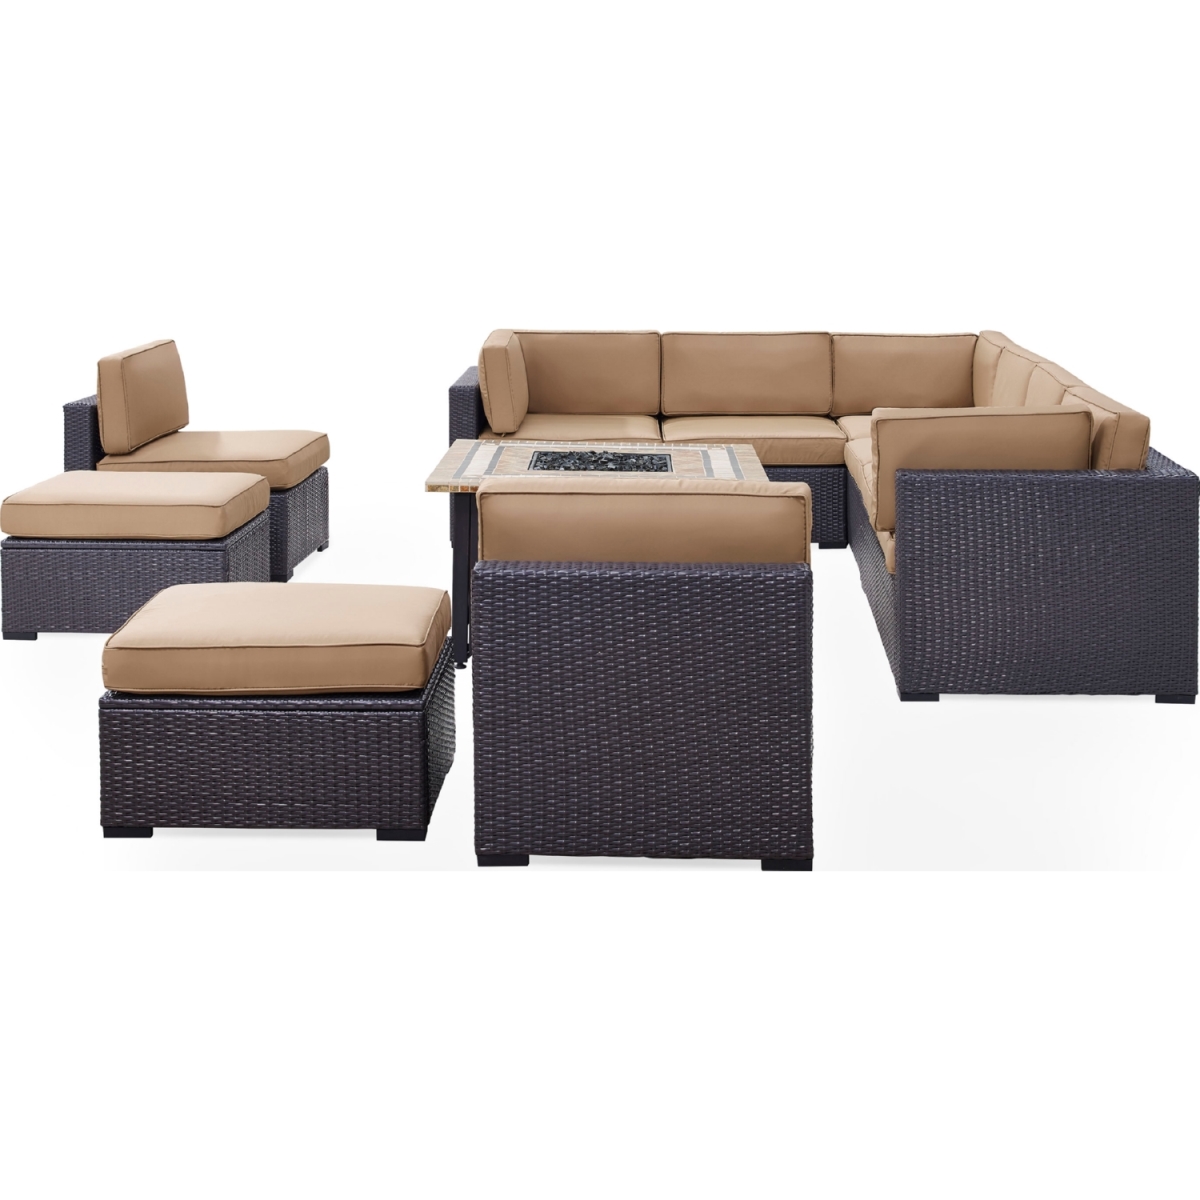 Biscayne 10 Person Outdoor Wicker Seating Set, Mocha - Three Loveseats, Two Armless Chairs, Two Ottomans, Tucson Firetable